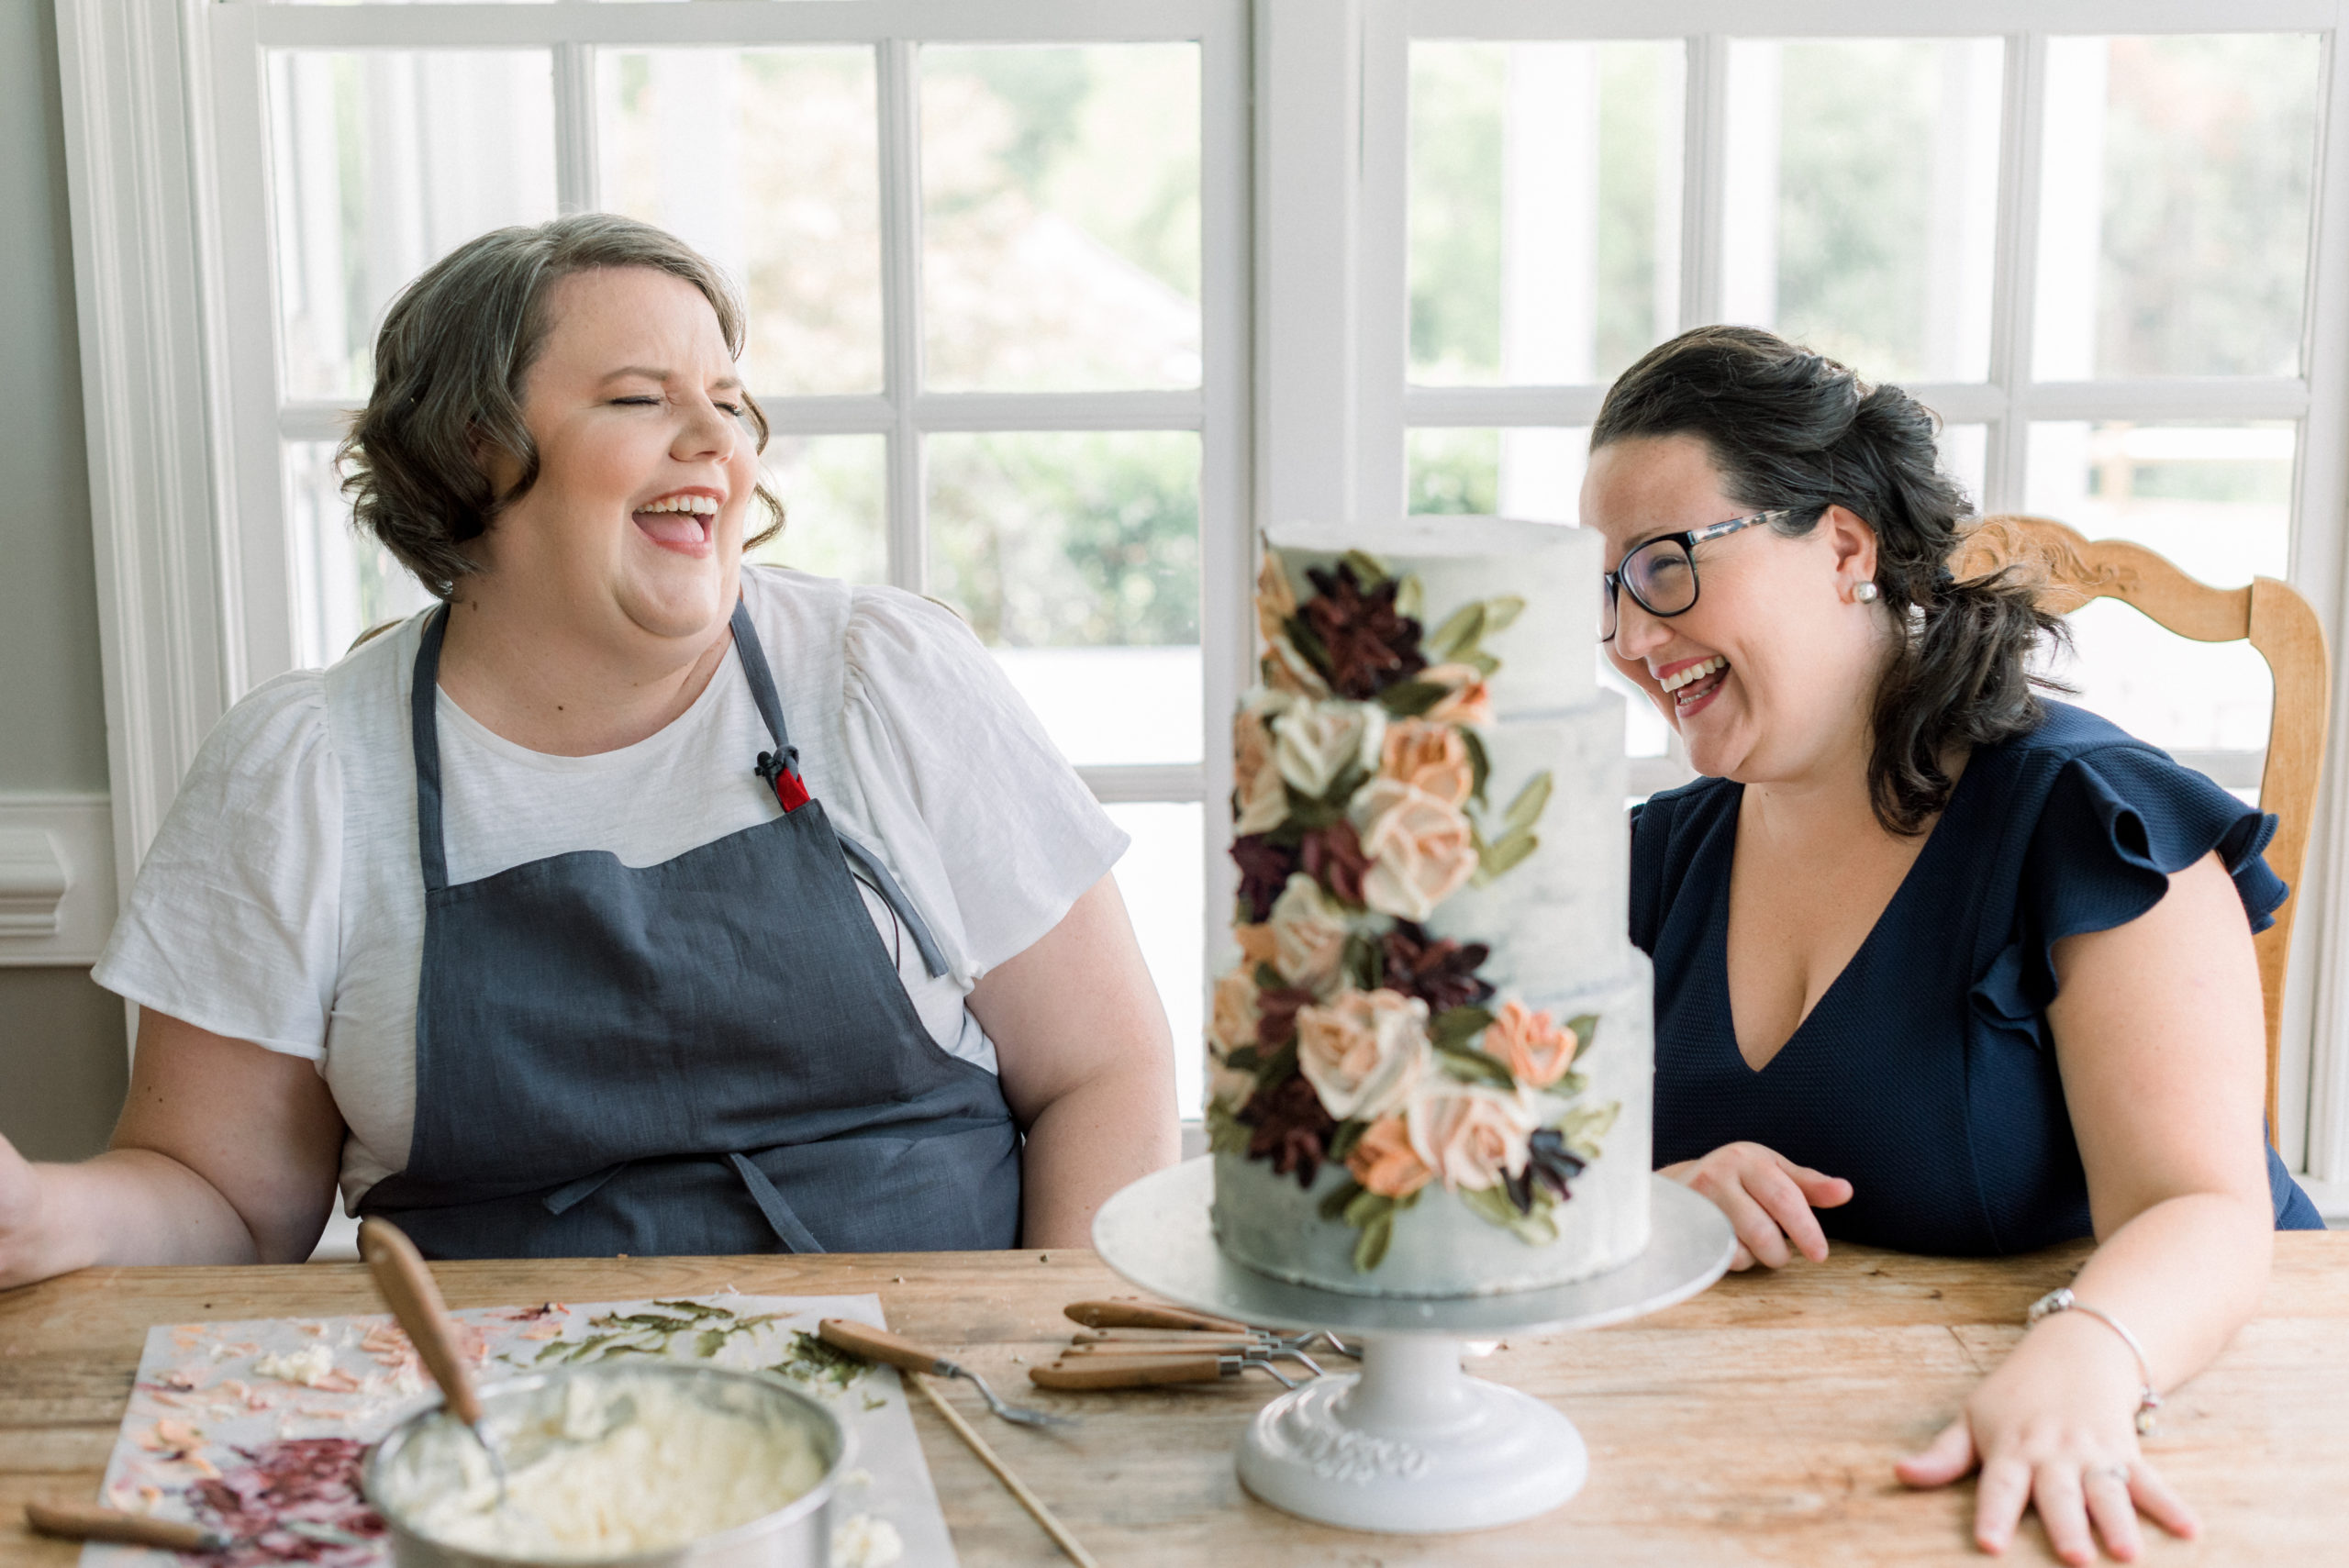 Miri of 10 Bloom Cakes + Jaclyn Hamilton of Timeless Love Weddings chatting while she decorates with butter cream 